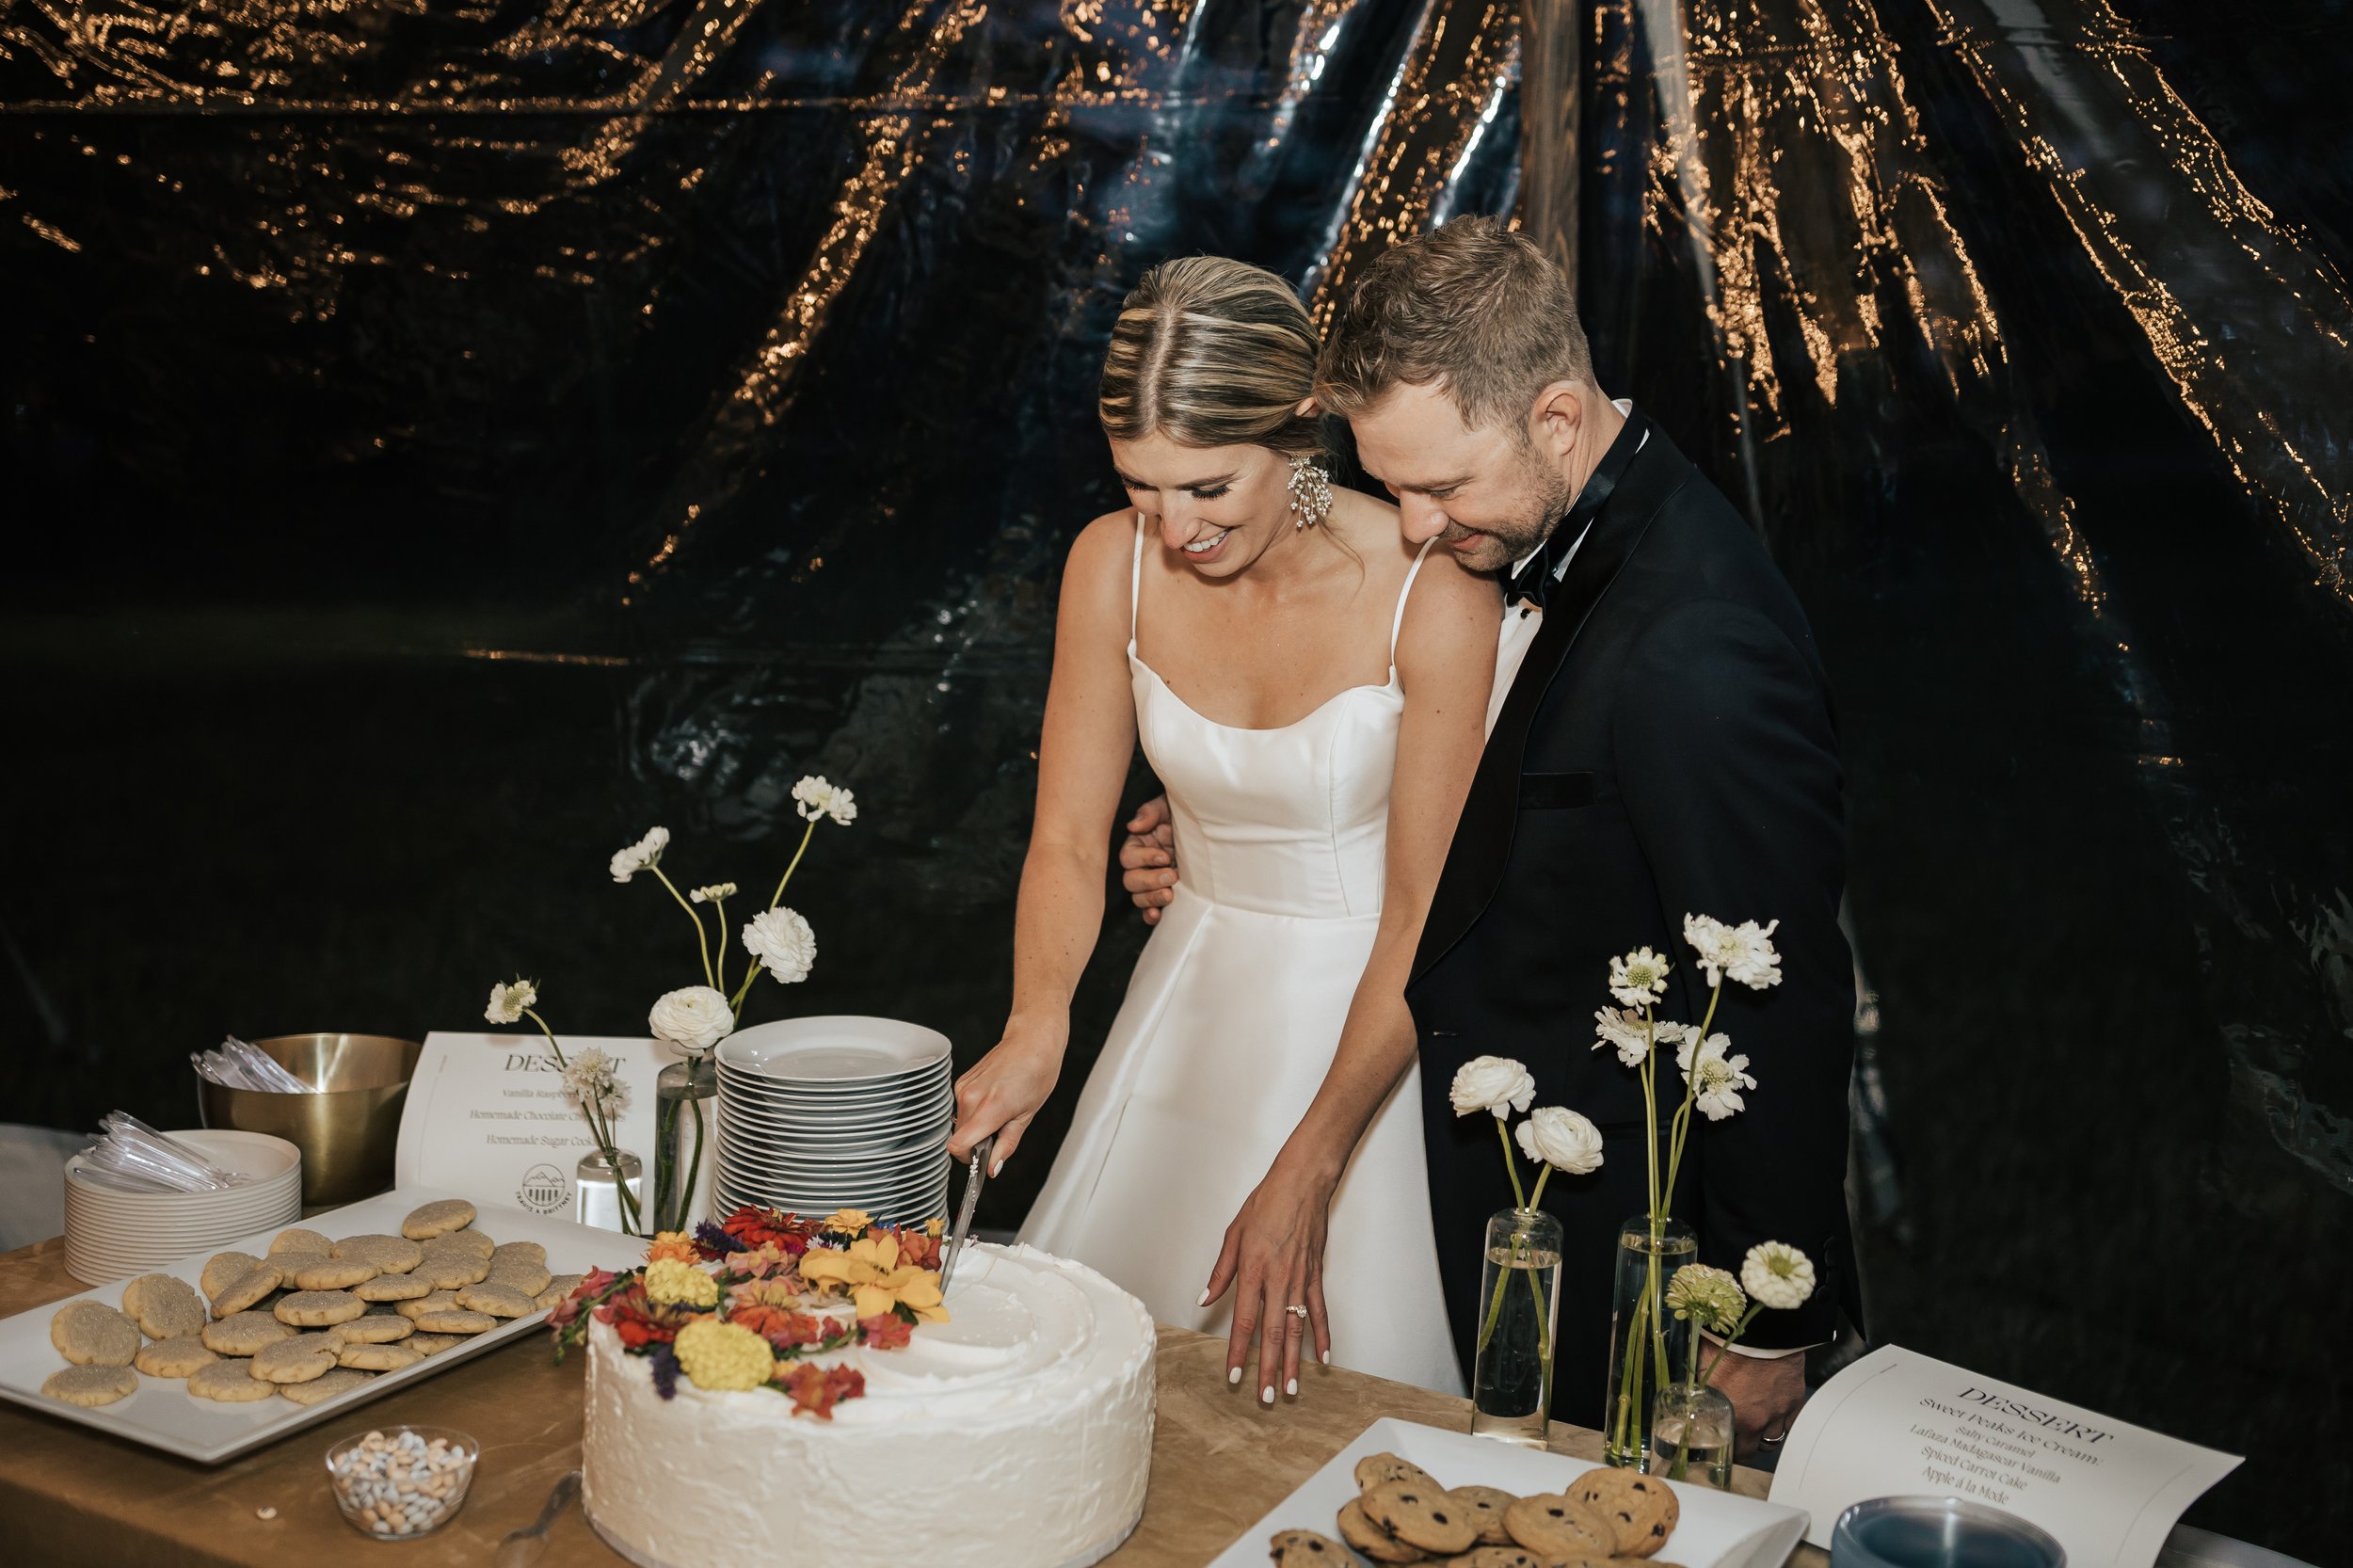  Bride and groom cutting cake. Wedding inspo. Bride is wearing gorgeous large white earrings with a strappy wedding dress and veil and groom is wearing a black suit and bowtie. #montanawedding #emilyjenkinsphoto #weddingphotos #summerwedding 